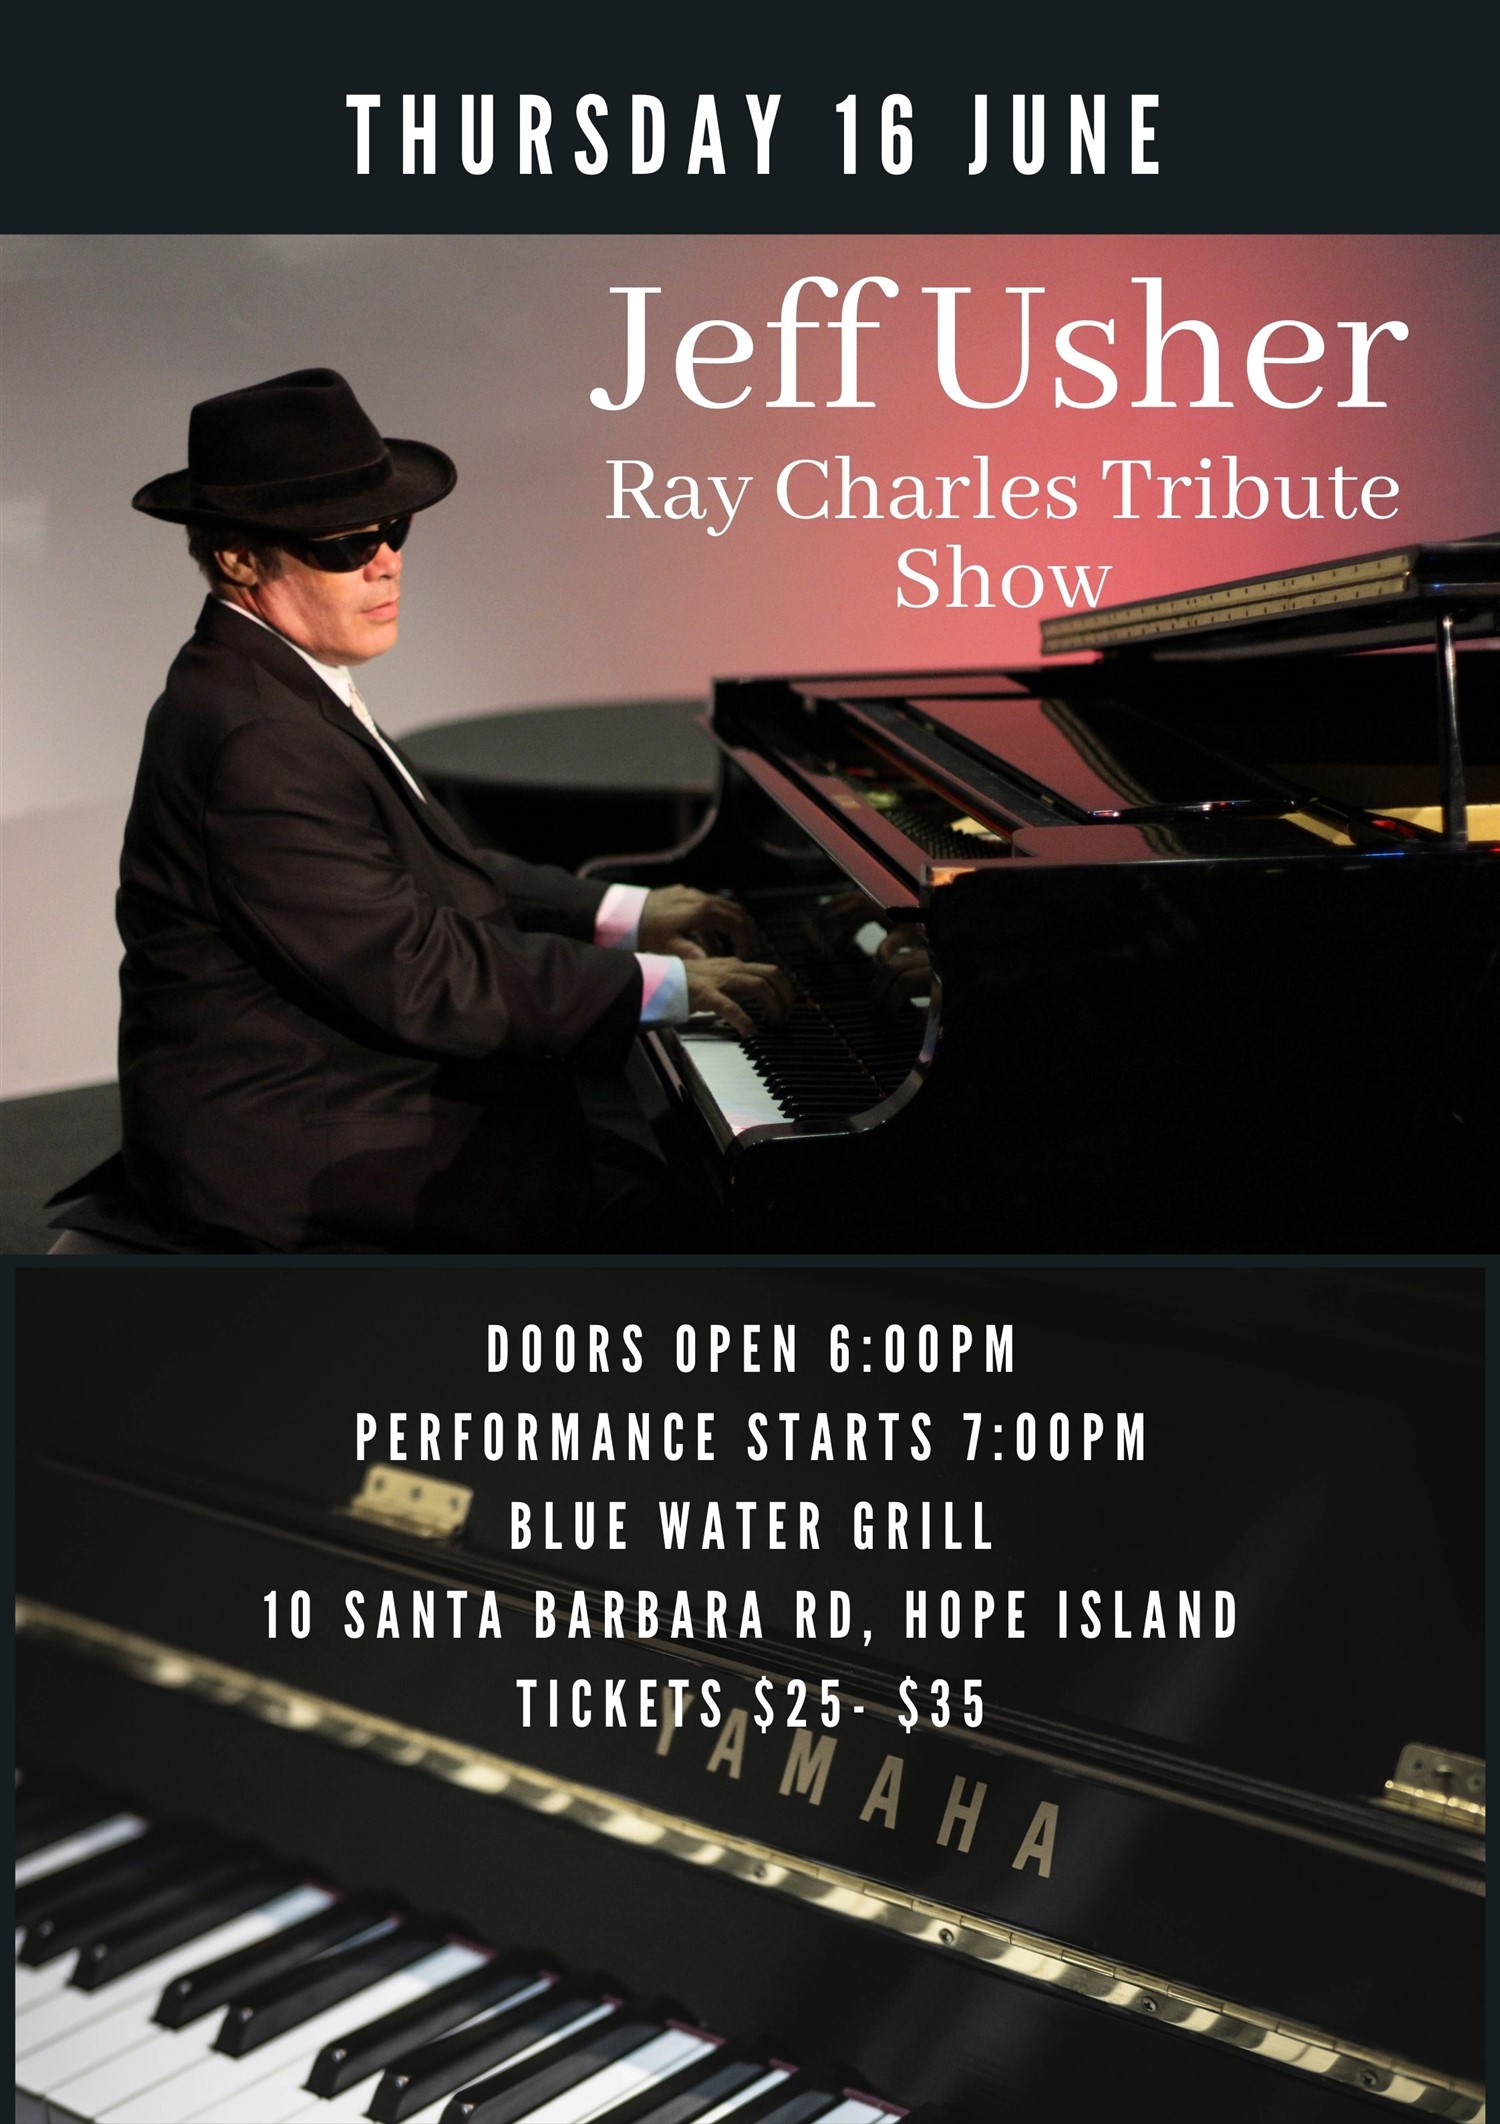 Jeff Usher Ray Charles Tribute Show on Jun 16, 18:00@Hope Island Jazz - Blue Water Grill - Buy tickets and Get information on  